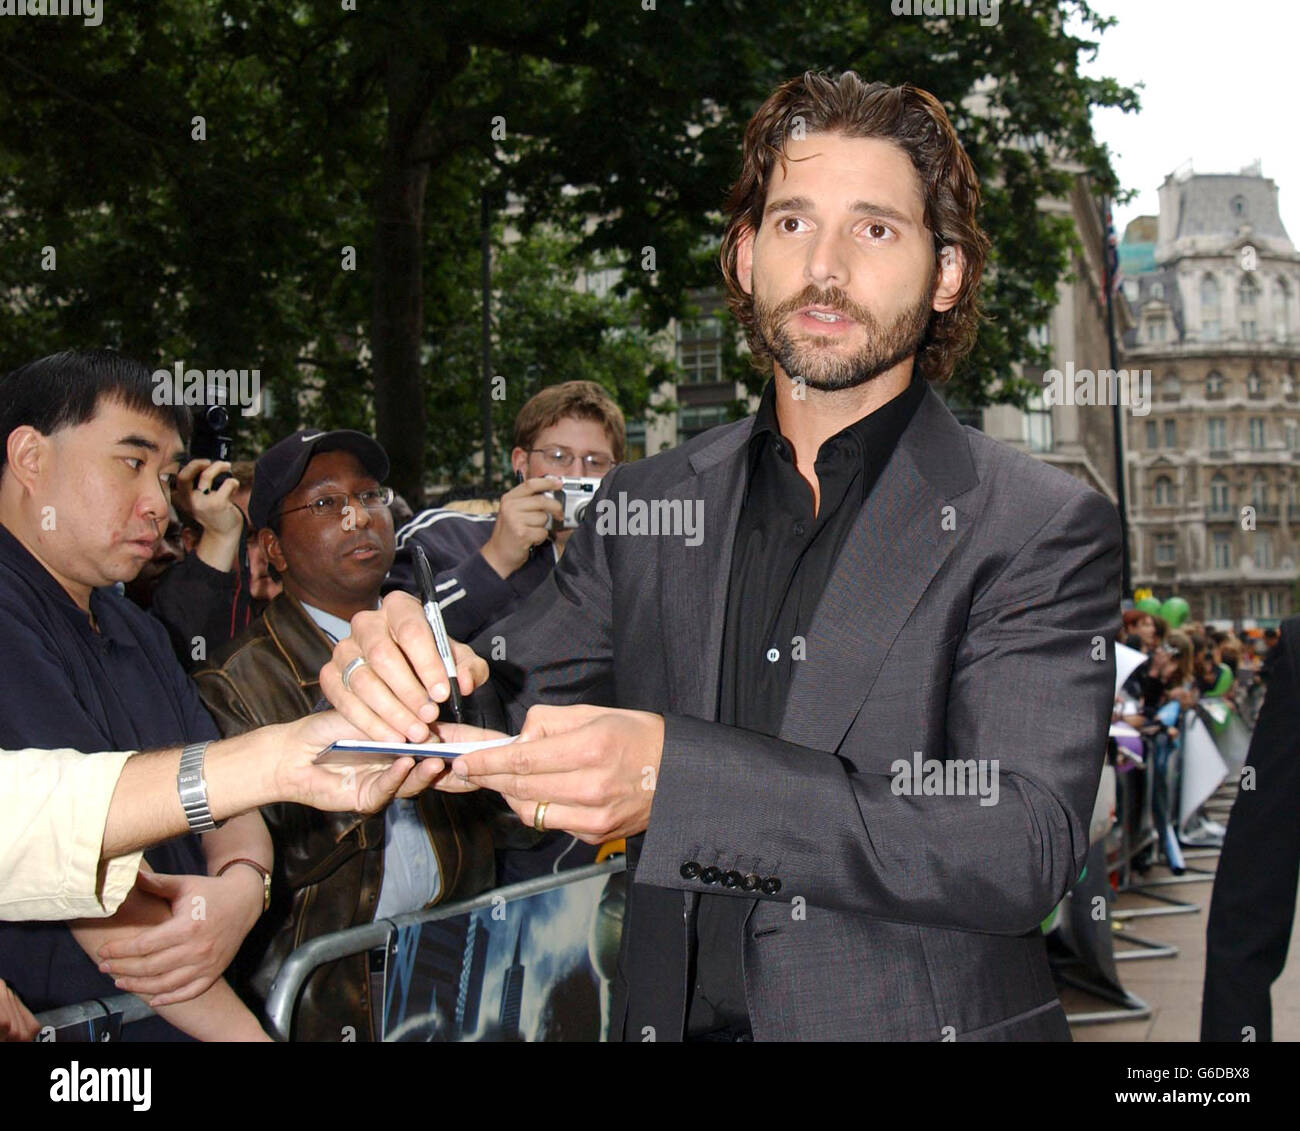 Eric Bana who plays the Hulk signs autographs as he arrives at the premiere of The Hulk at the Empire cinema in London's Leicester Square. Stock Photo